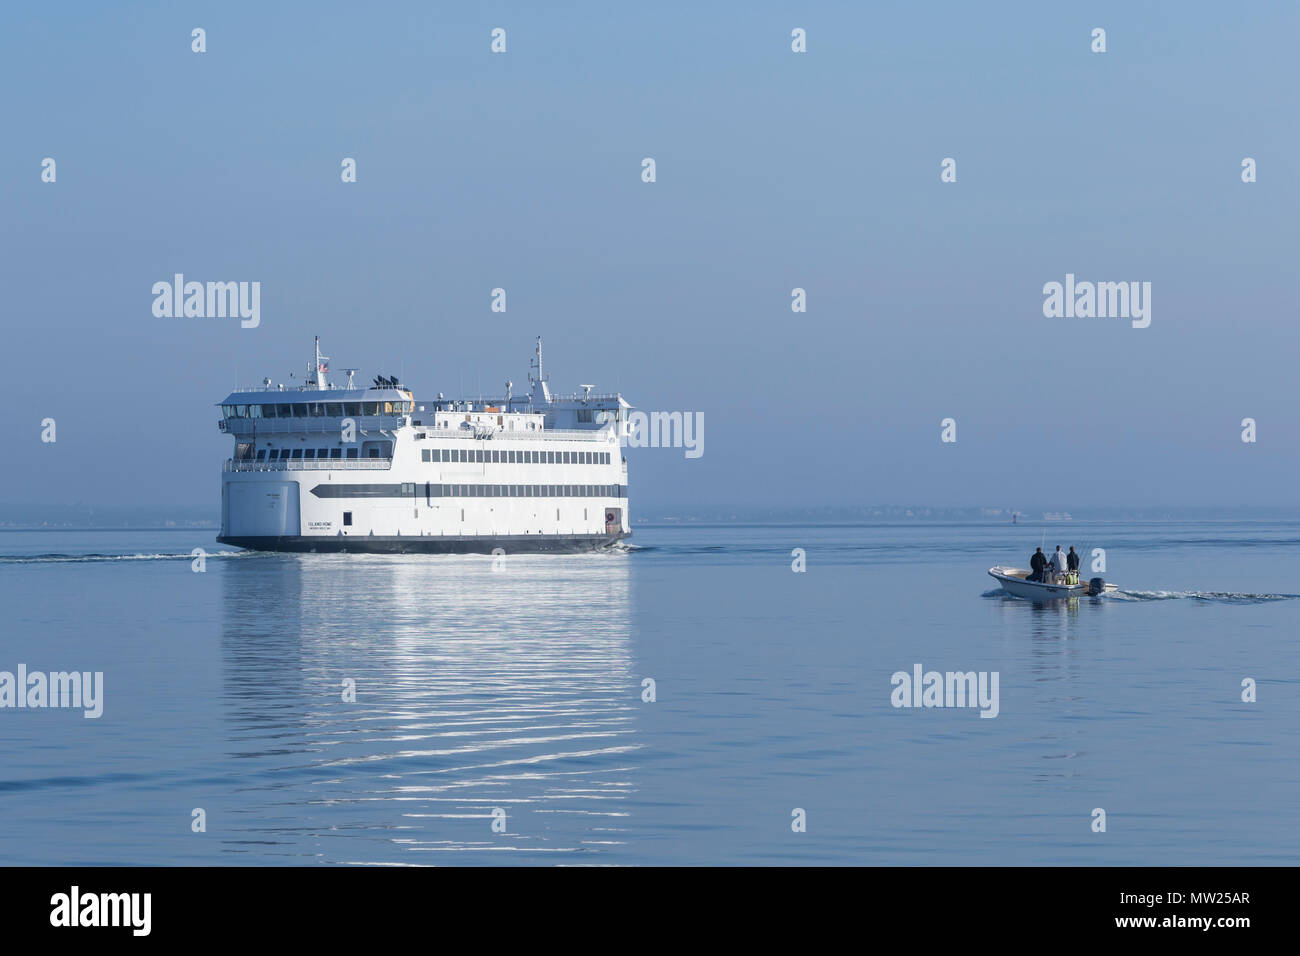 Steamship Authority ferry 'MV Island Home' leaves Vineyard Haven harbor on Martha's Vineyard headed for Woods Hole on the mainland. Stock Photo